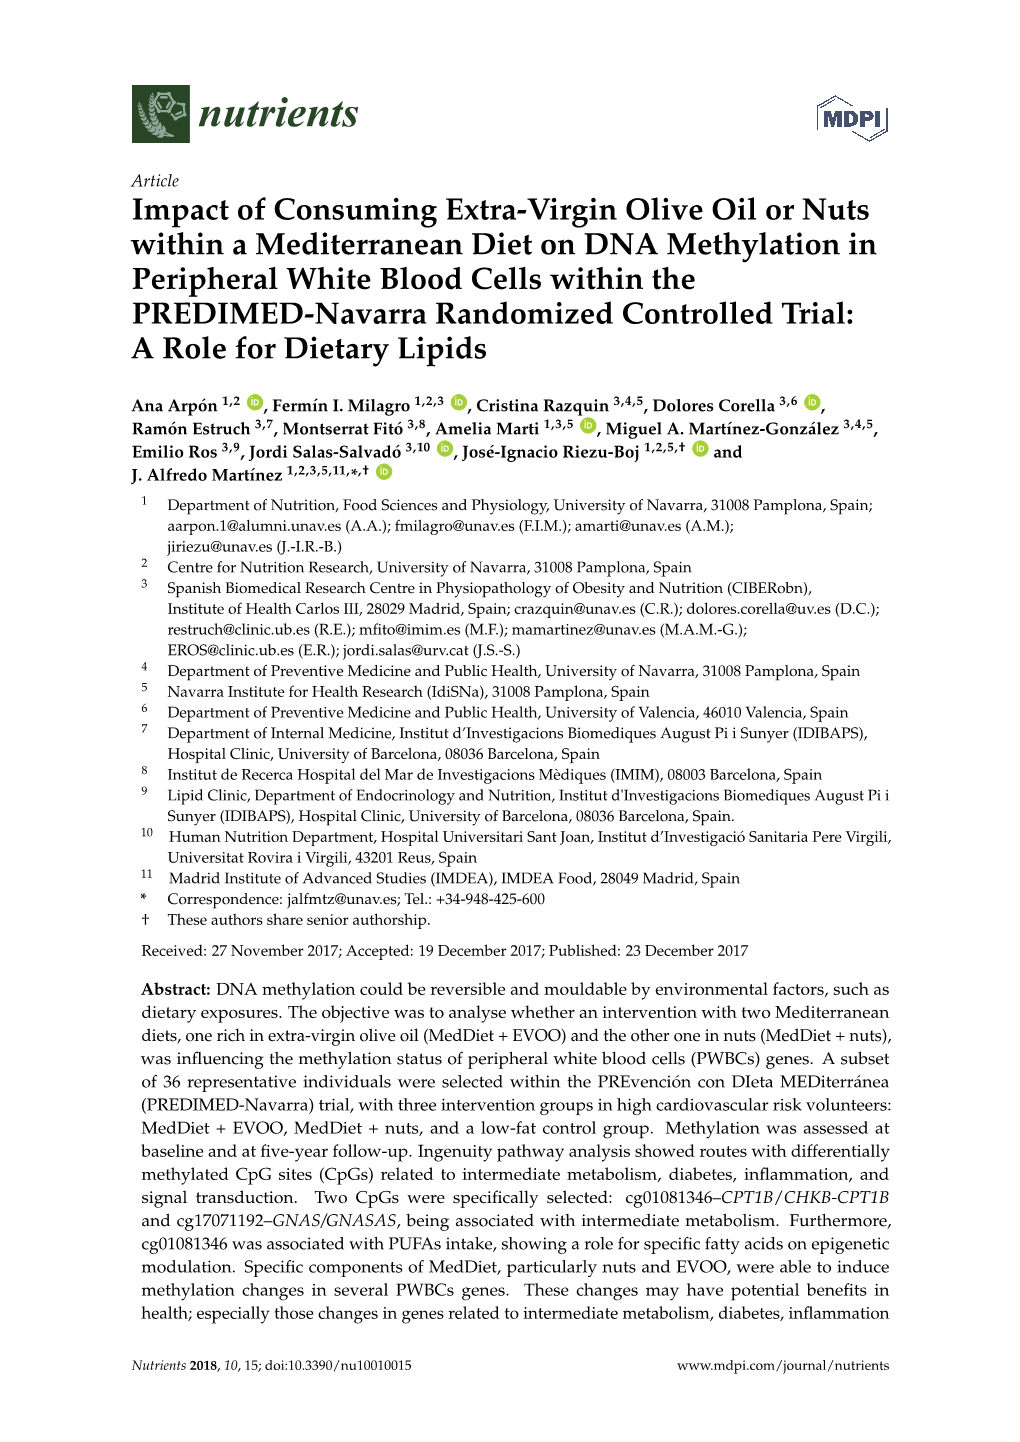 Impact of Consuming Extra-Virgin Olive Oil Or Nuts Within a Mediterranean Diet on DNA Methylation in Peripheral White Blood Cell